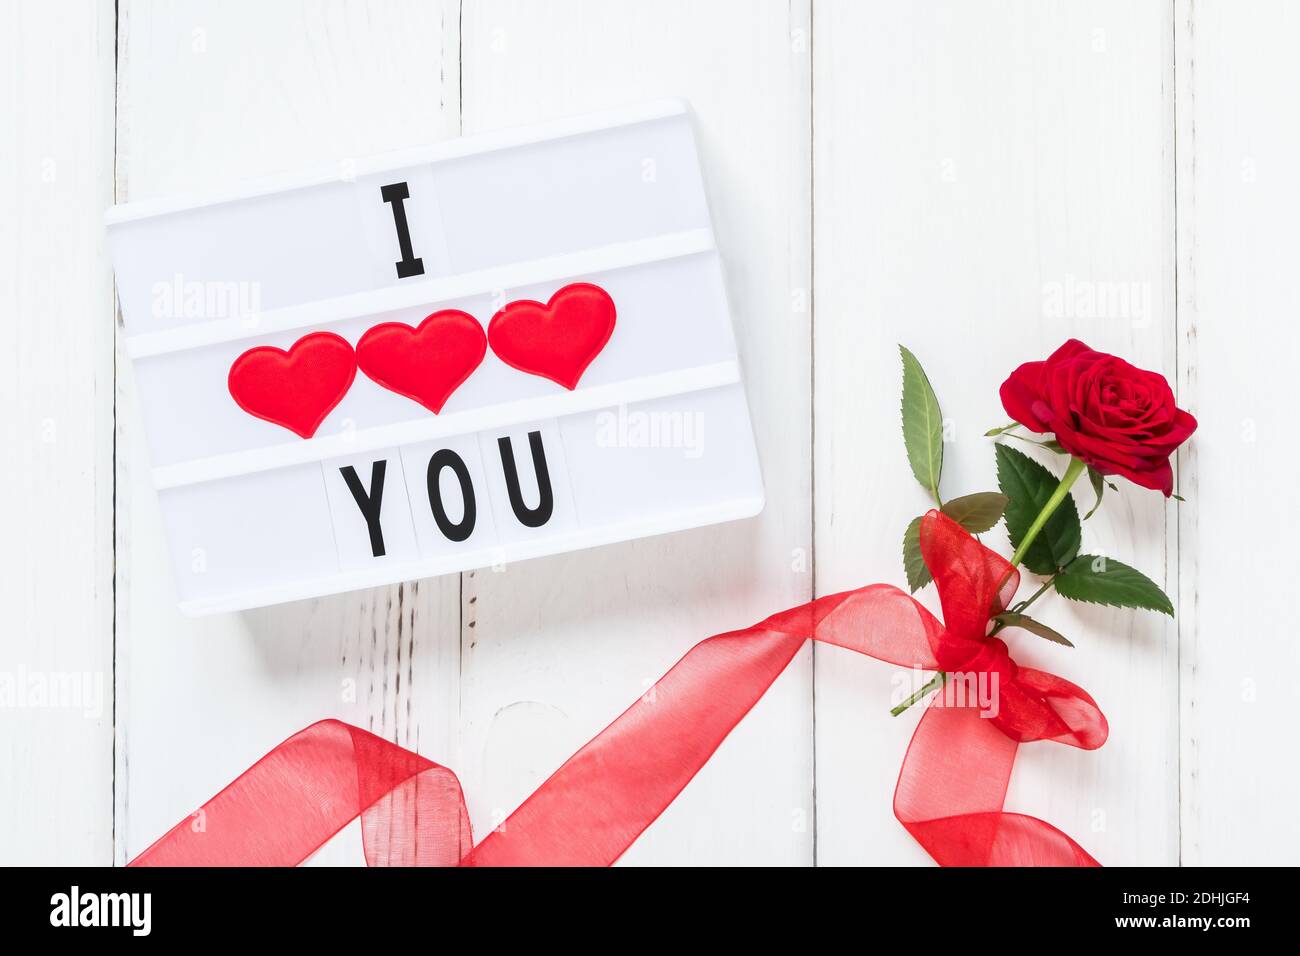 Romantic gift & red roses, isolated on pink background, love concept, Stock image